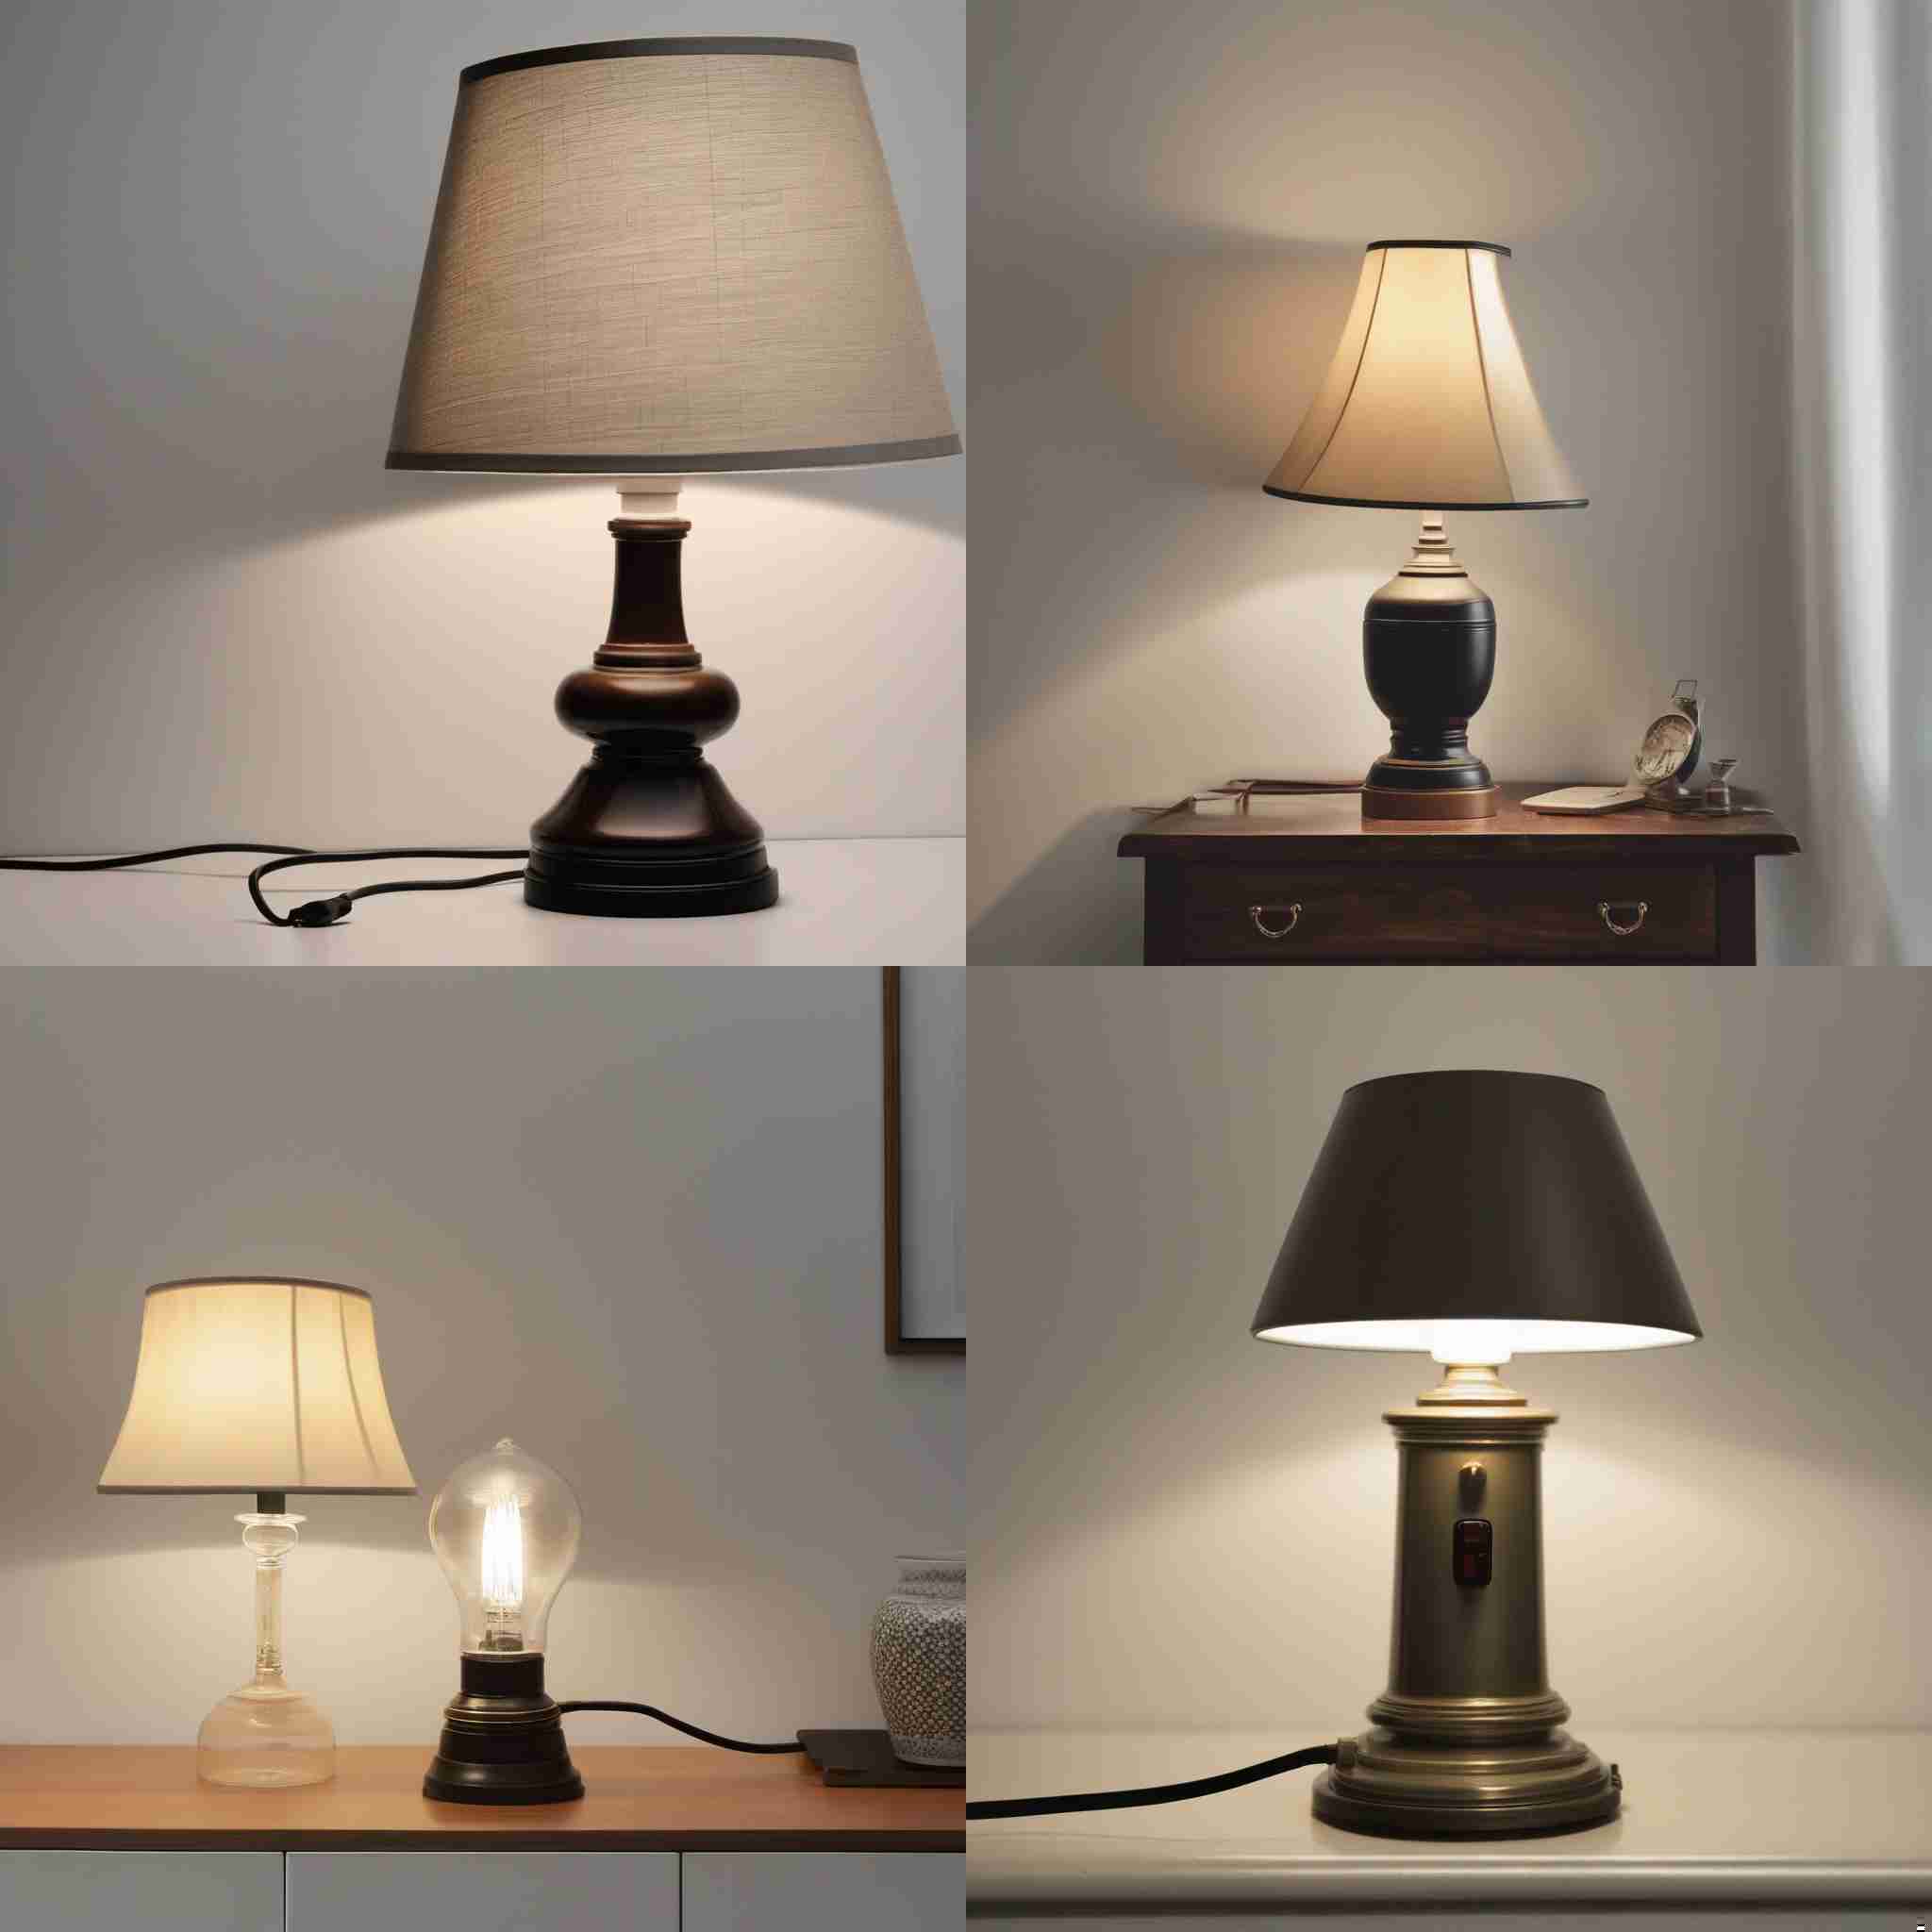 A lamp with the knob switched off